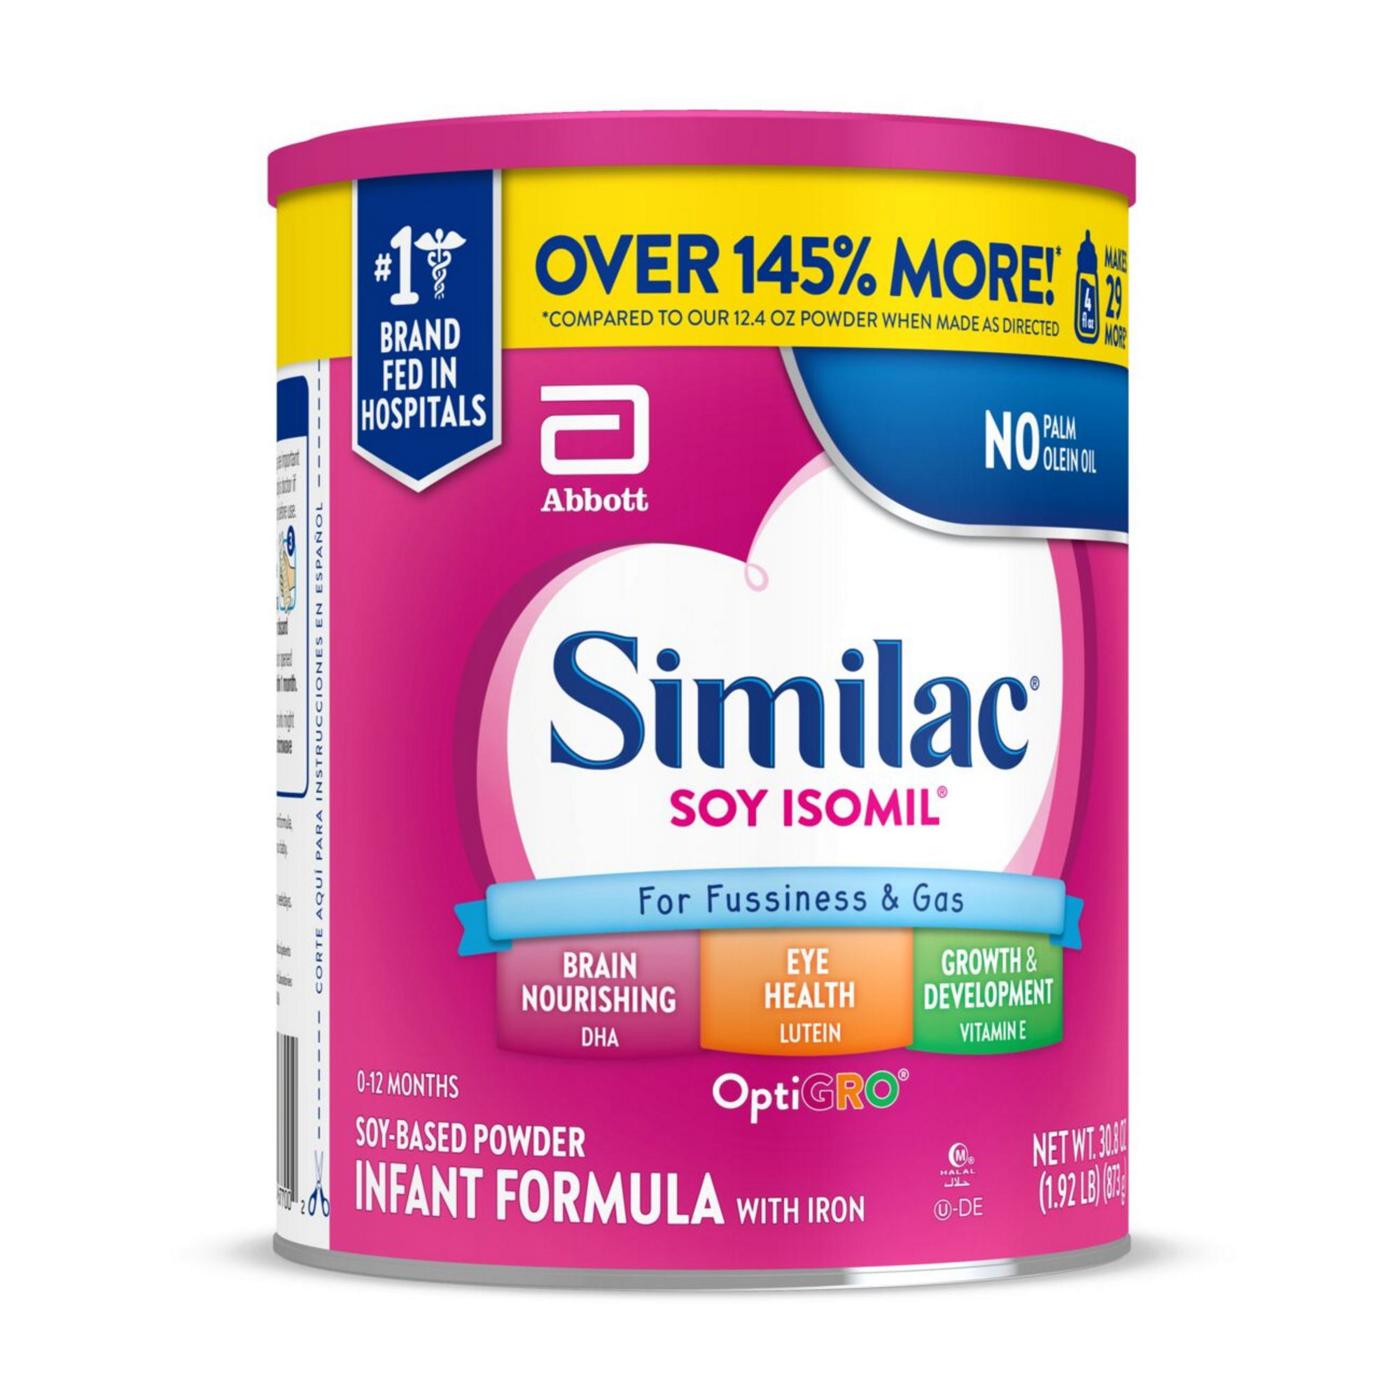 Similac Soy Isomil For Fussiness and Gas Infant Formula with Iron Powder; image 6 of 9